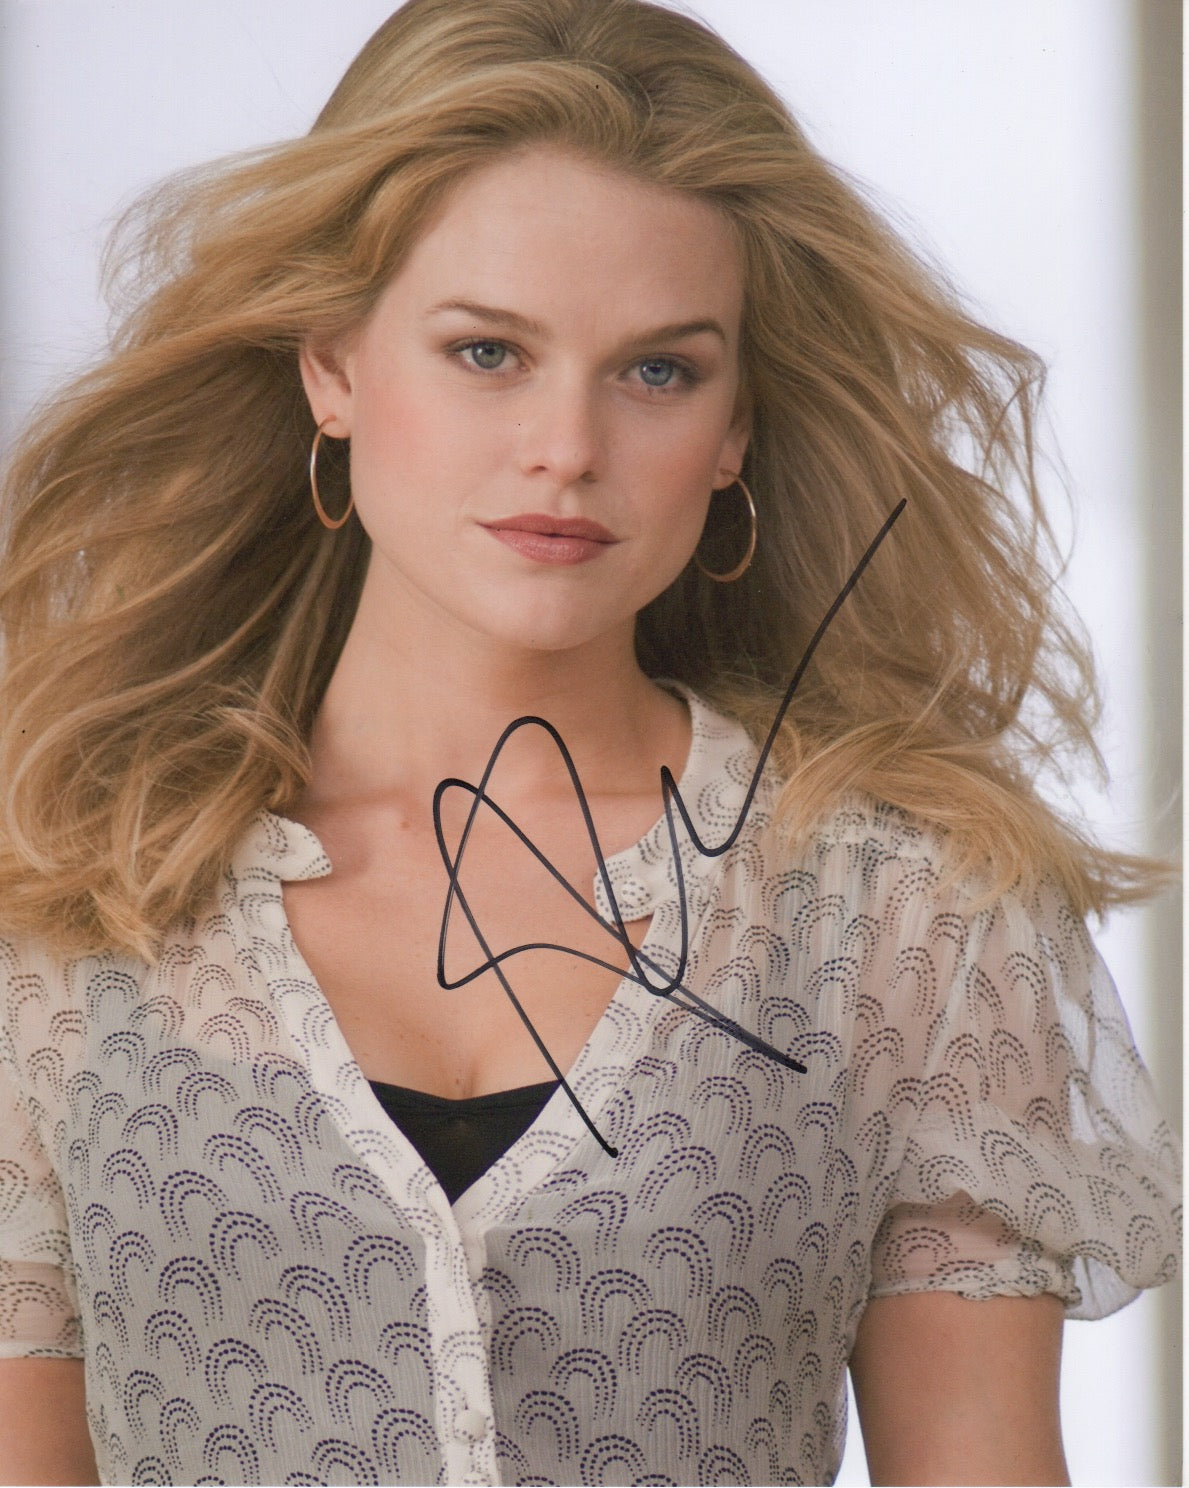 Alice Eve Sexy Signed Autograph 8x10 Photo #2 - Outlaw Hobbies Authentic Autographs